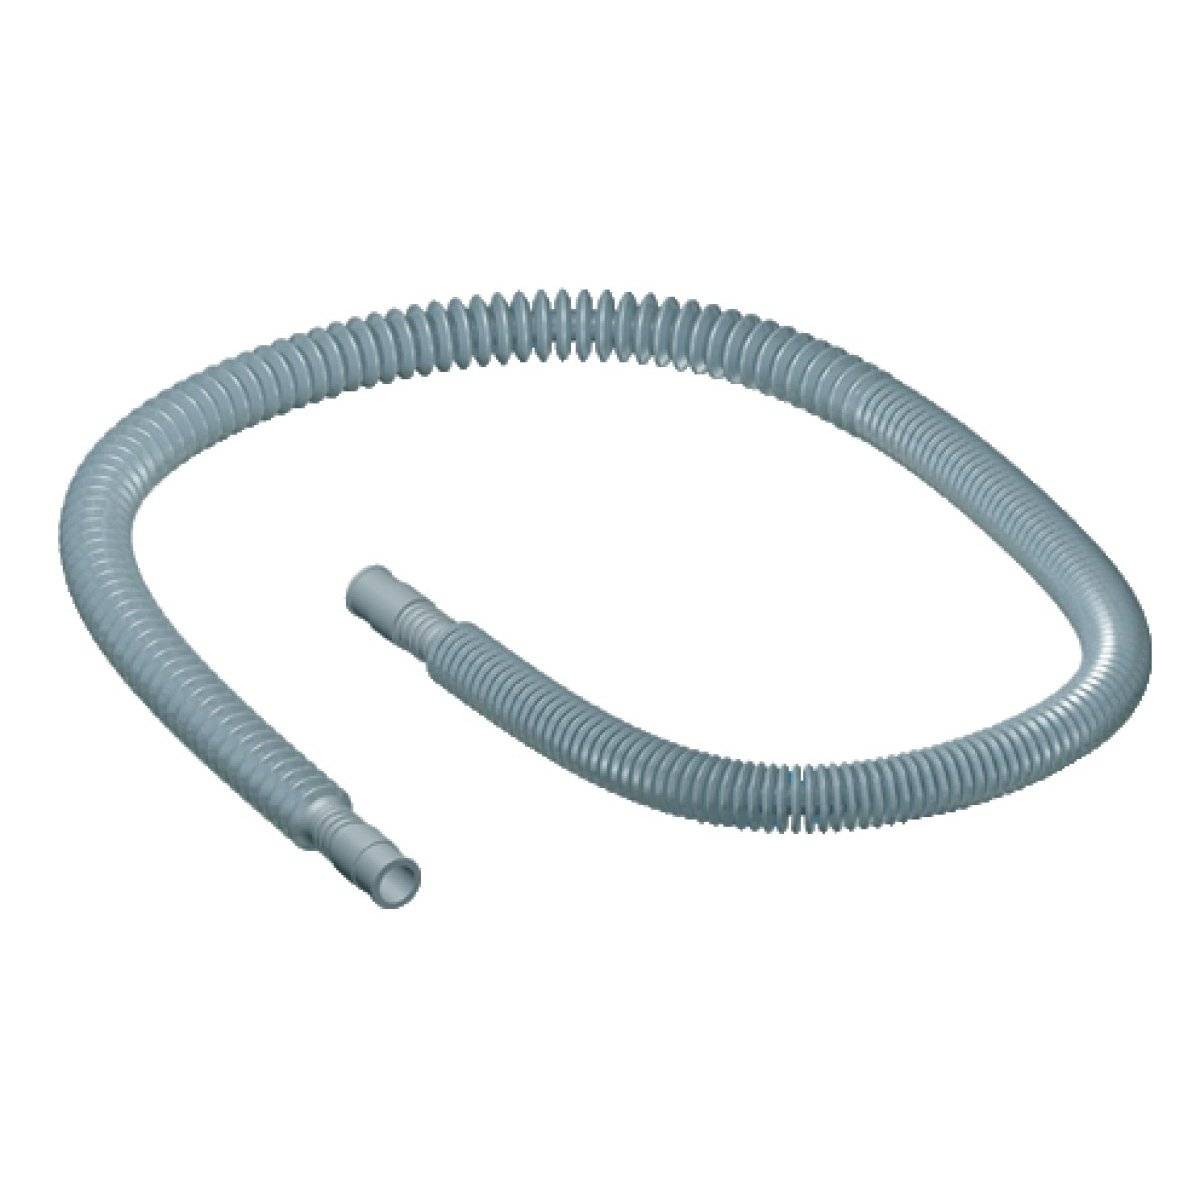 Washing machine drain hose extendable from 0.6m to 2m